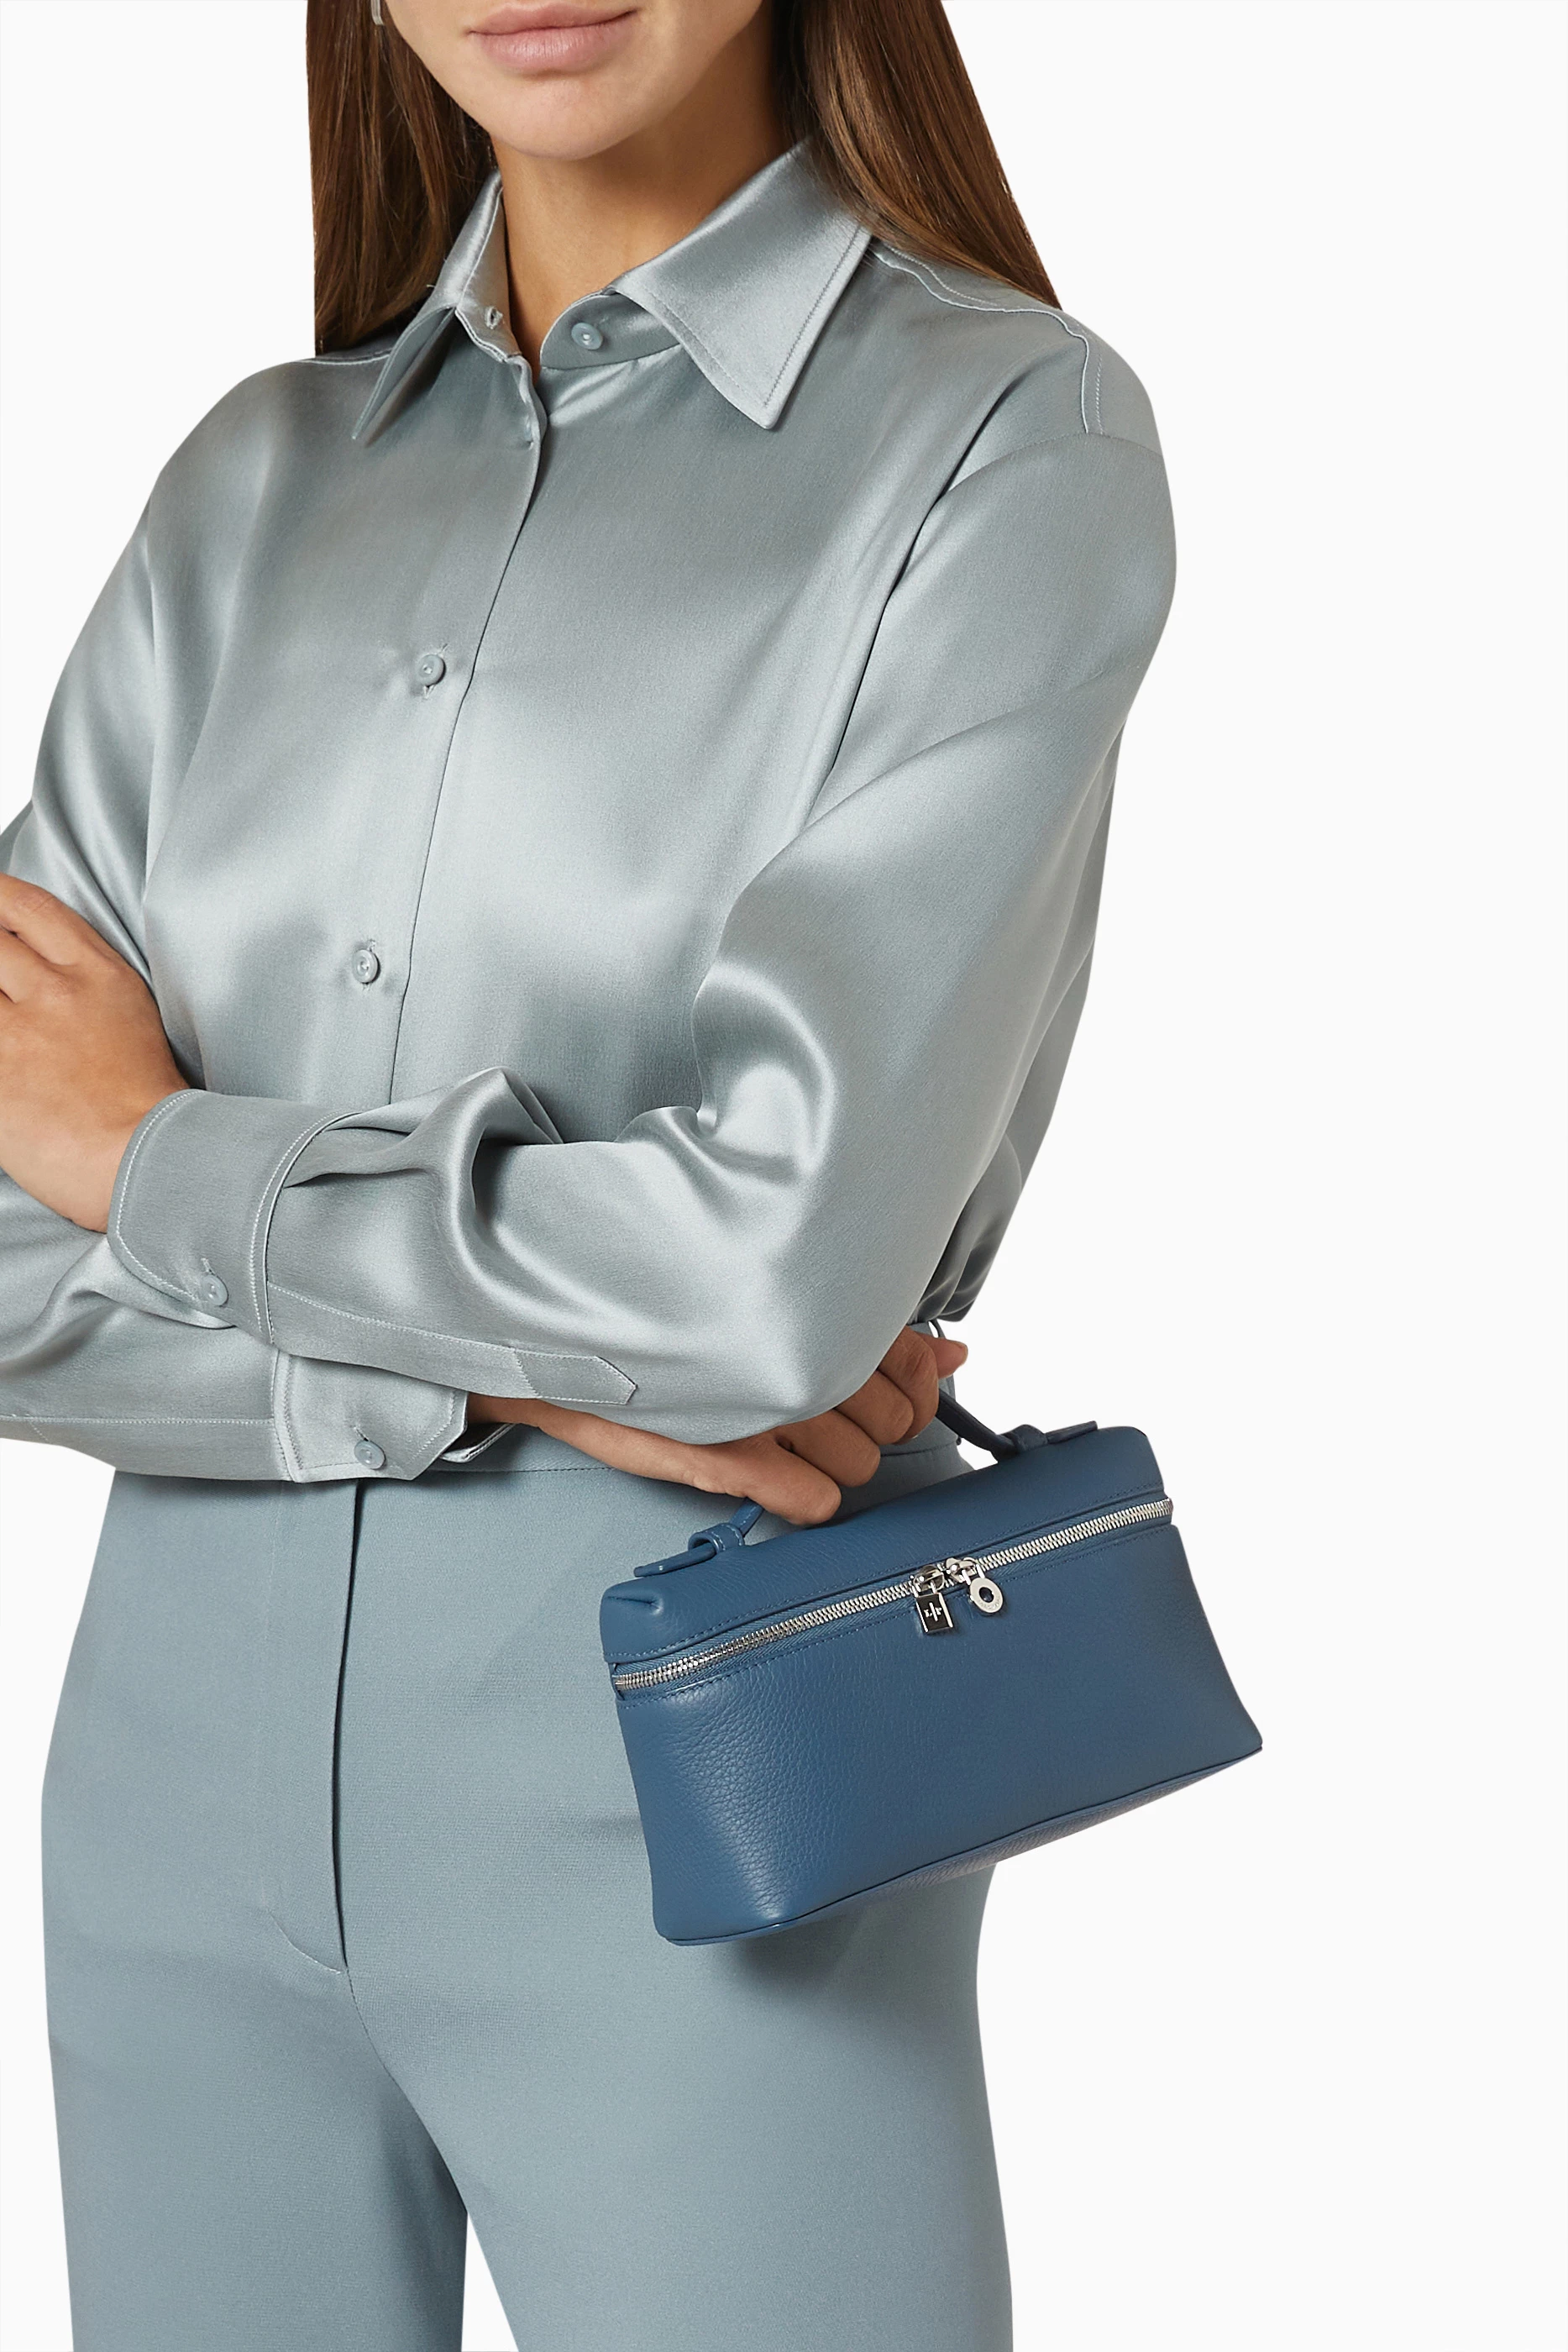 Loro Piana Bags Offer In Dubai - Blue Extra Pocket L19 Pouch Womens